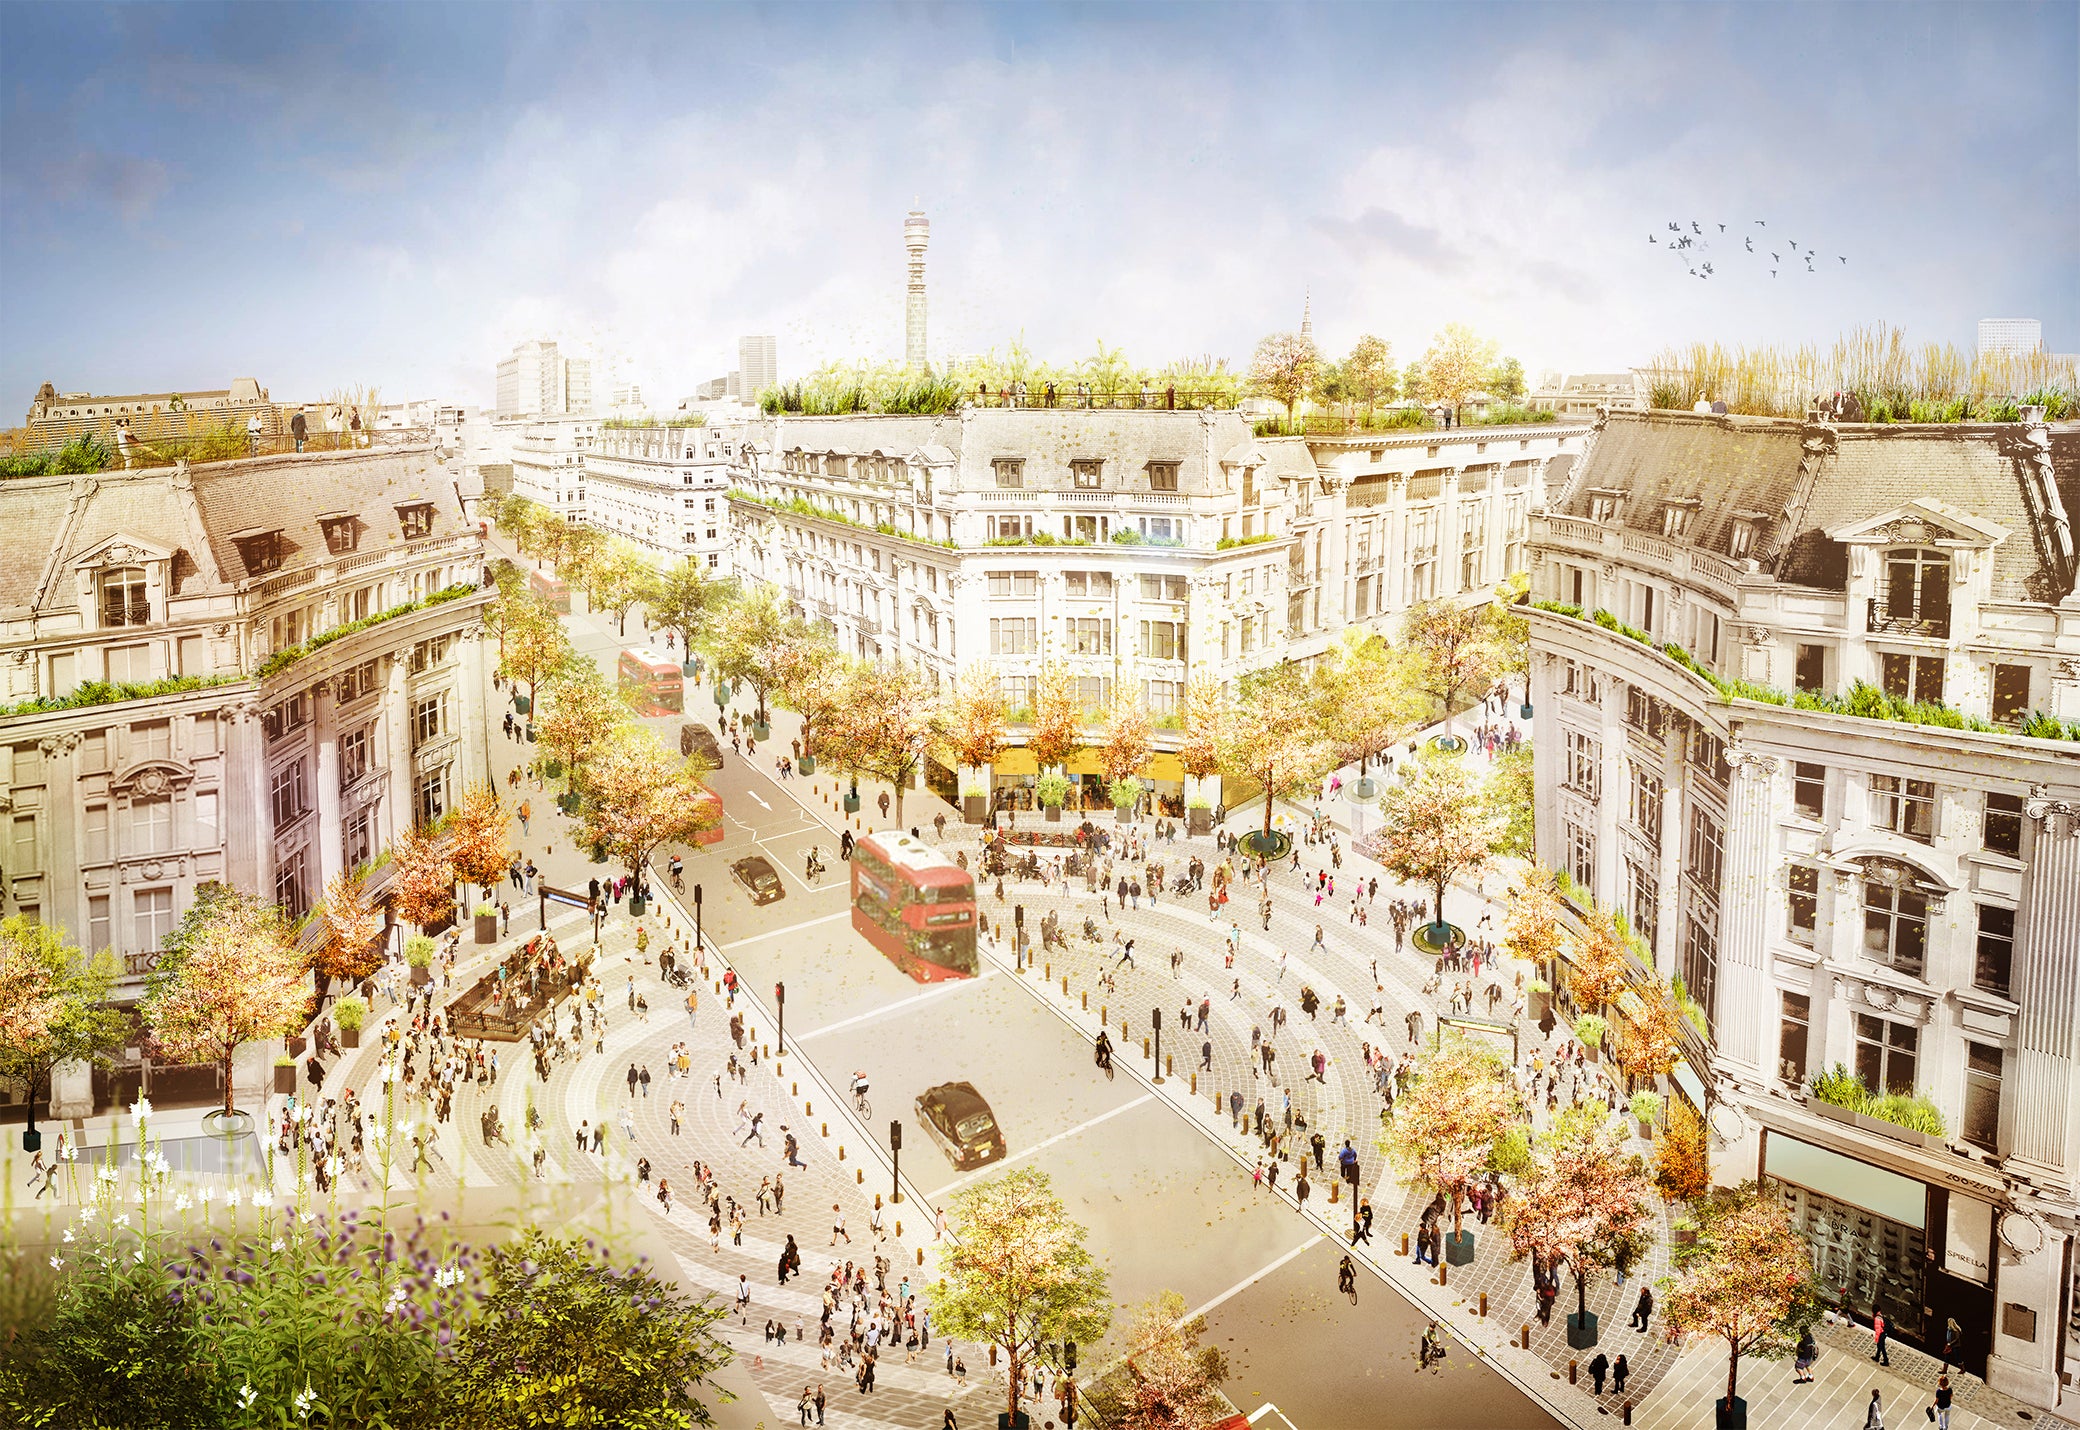 <p>Artist impression showing future transformation of Oxford Circus with traffic continuing on Regent Street and two new piazzas on Oxford Street</p>